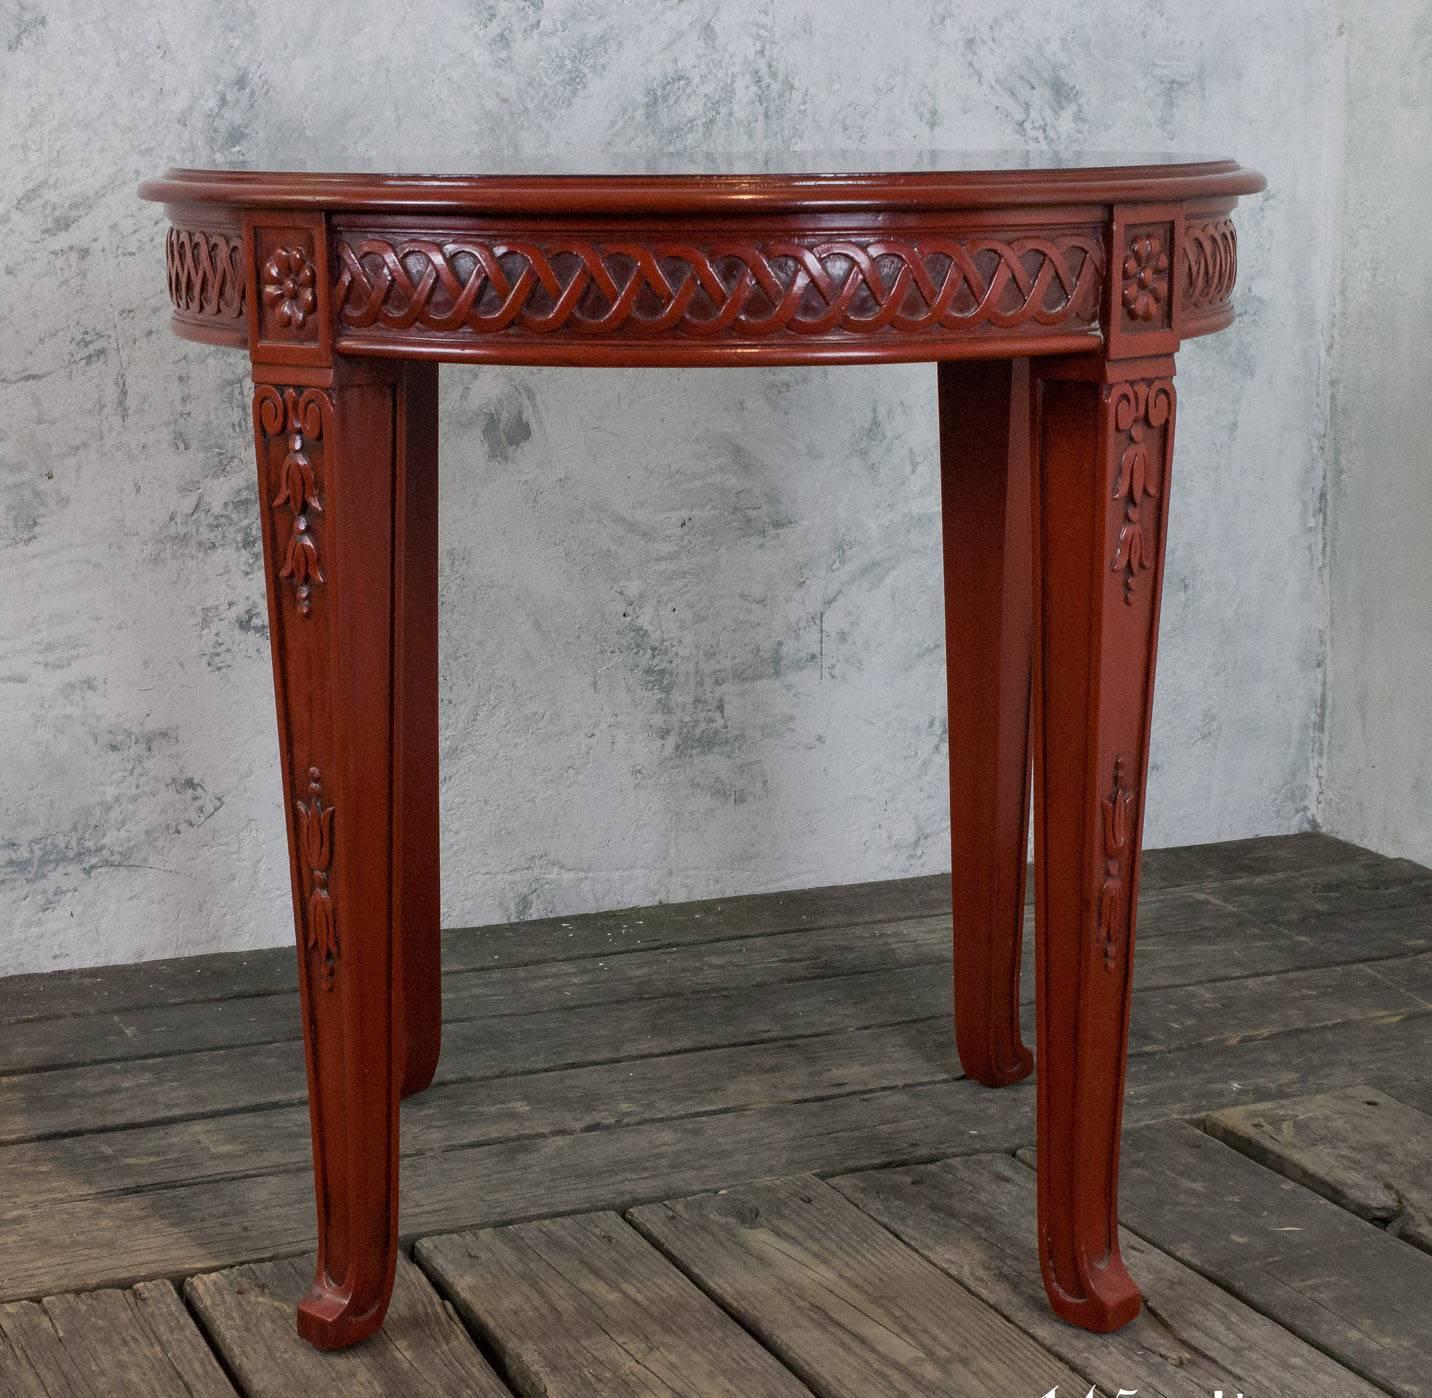 American, 1940s Chinese modern style round end table with antique red finish.